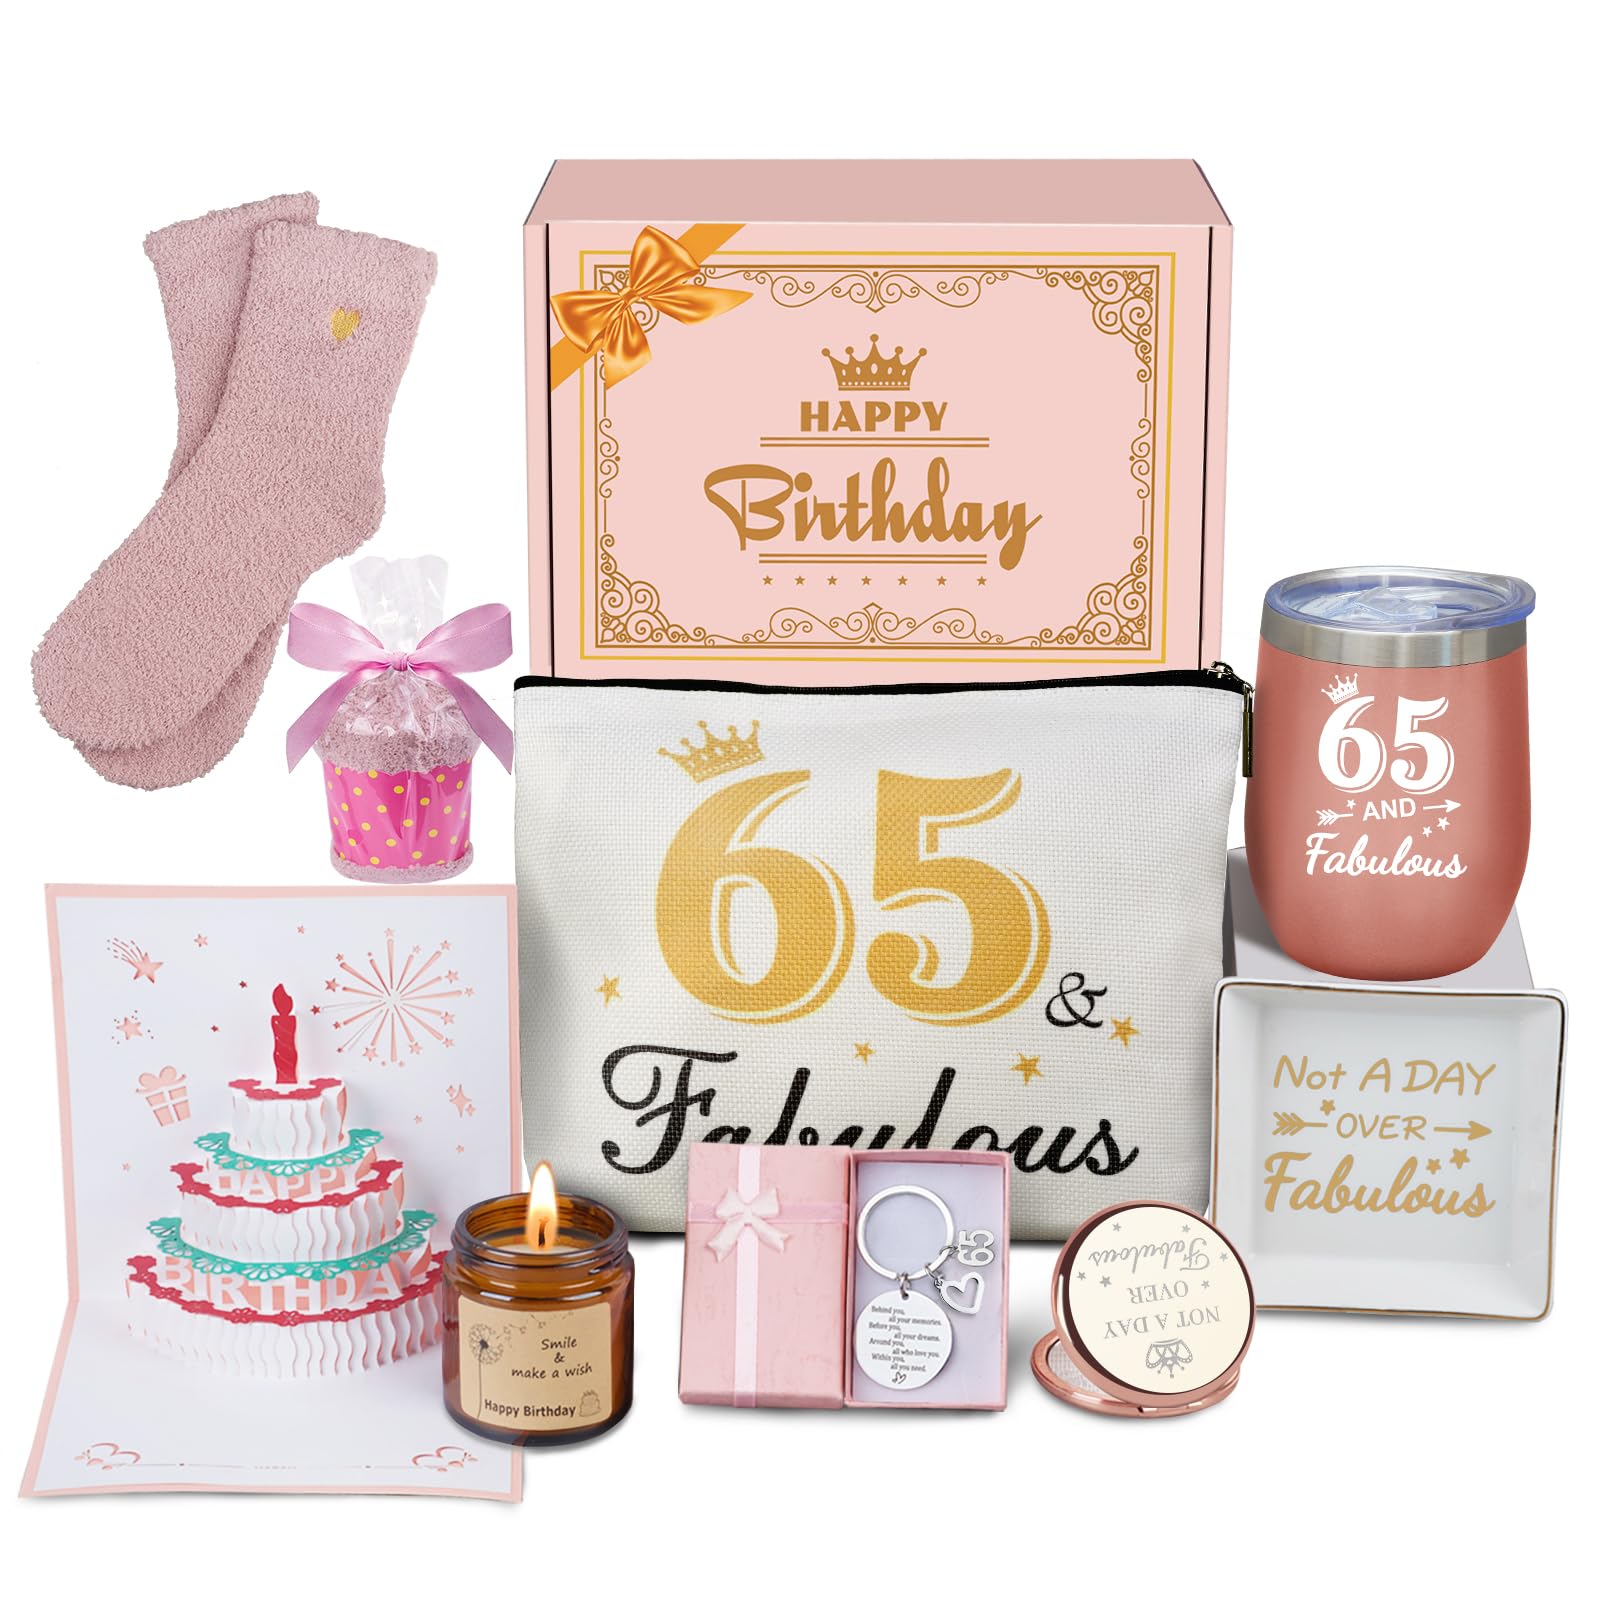 65th Birthday Gifts For Women, Happy 65th Birthday Gifts For Her Best Friend Mom Sister Wife Turning 65, Gift For 65 Year Old Woman Birthday Unique, Funny Birthday Gift Box Ideas